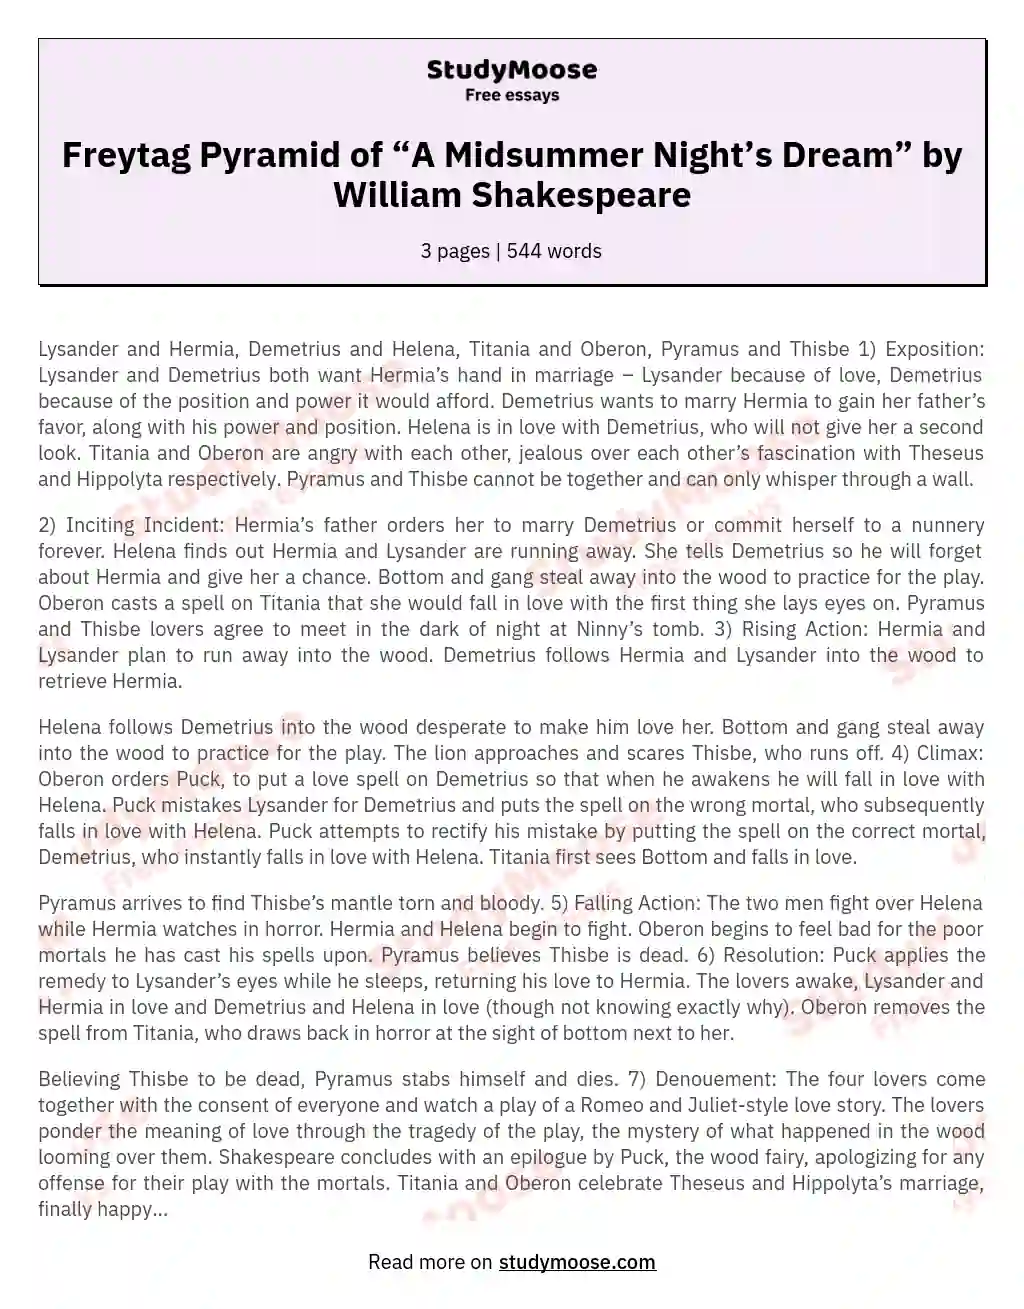 Freytag Pyramid of “A Midsummer Night’s Dream” by William Shakespeare